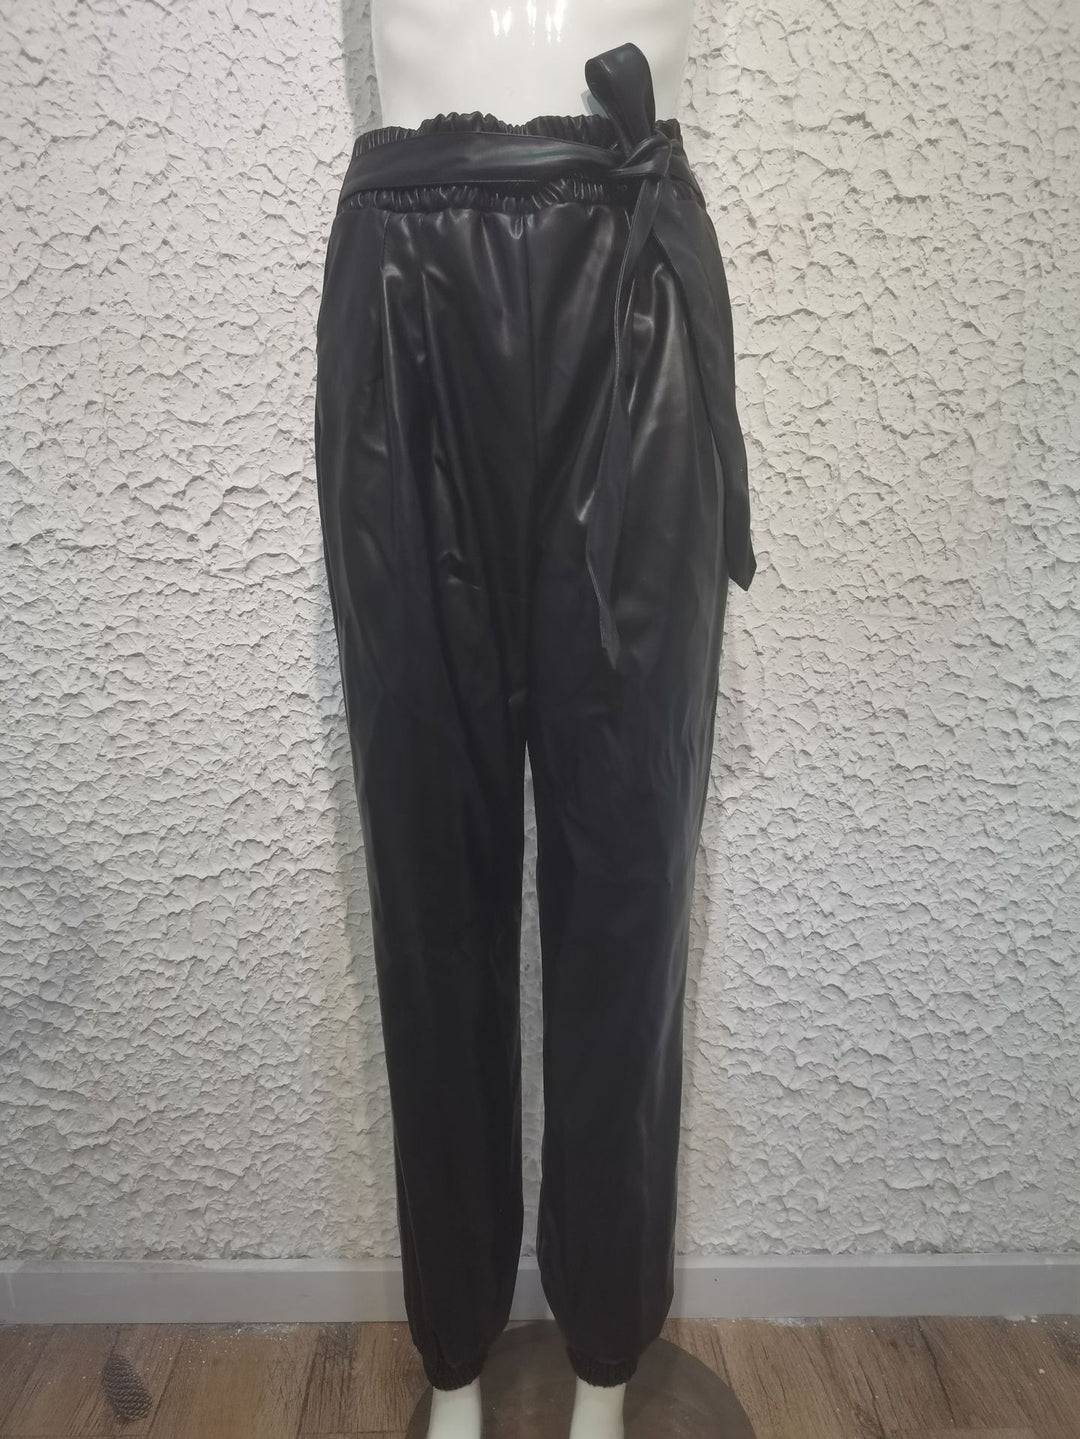 Women's casual PU leather pants